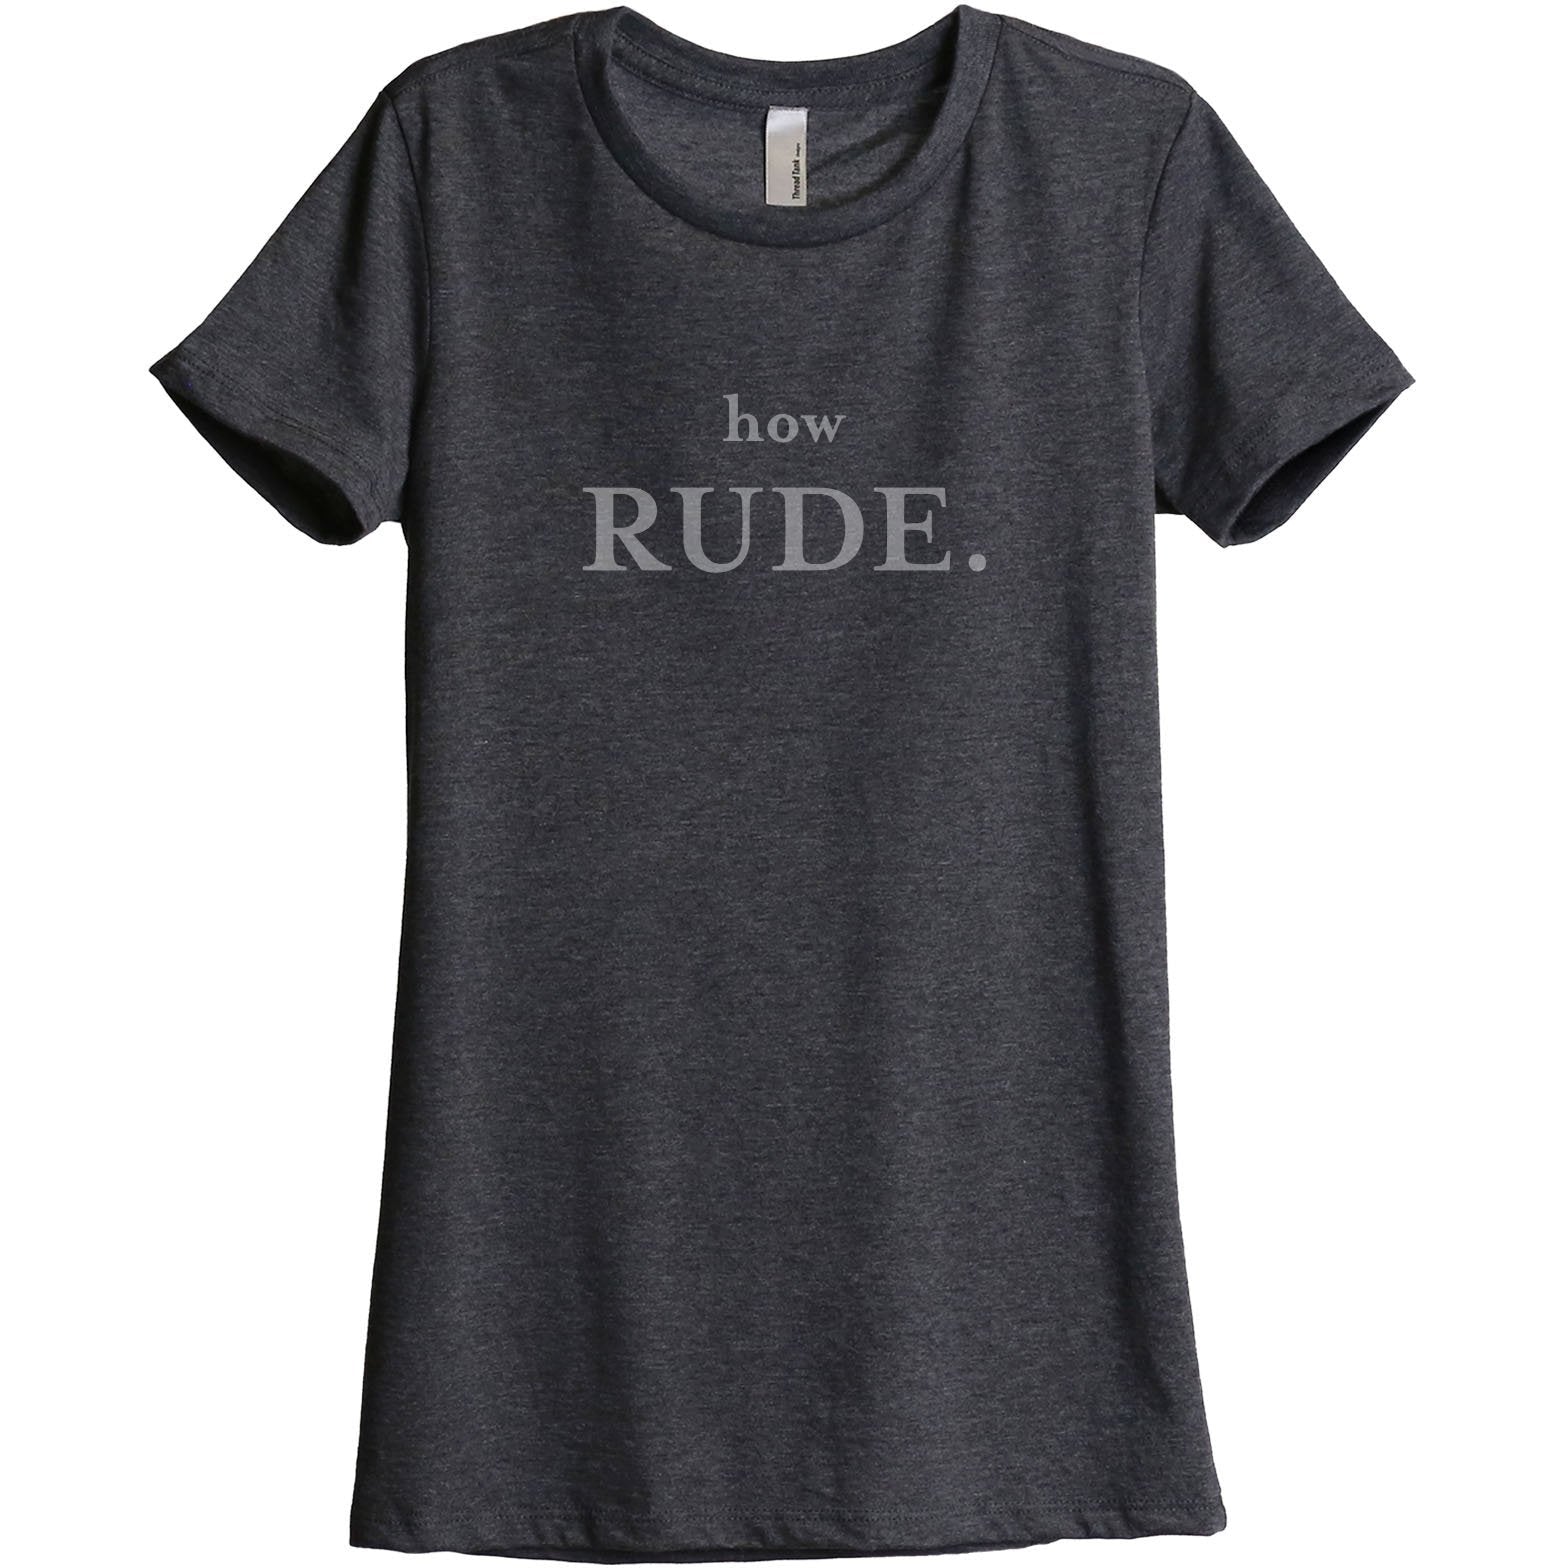 How Rude Women's Relaxed Crewneck T-Shirt Top Tee Heather Rouge
